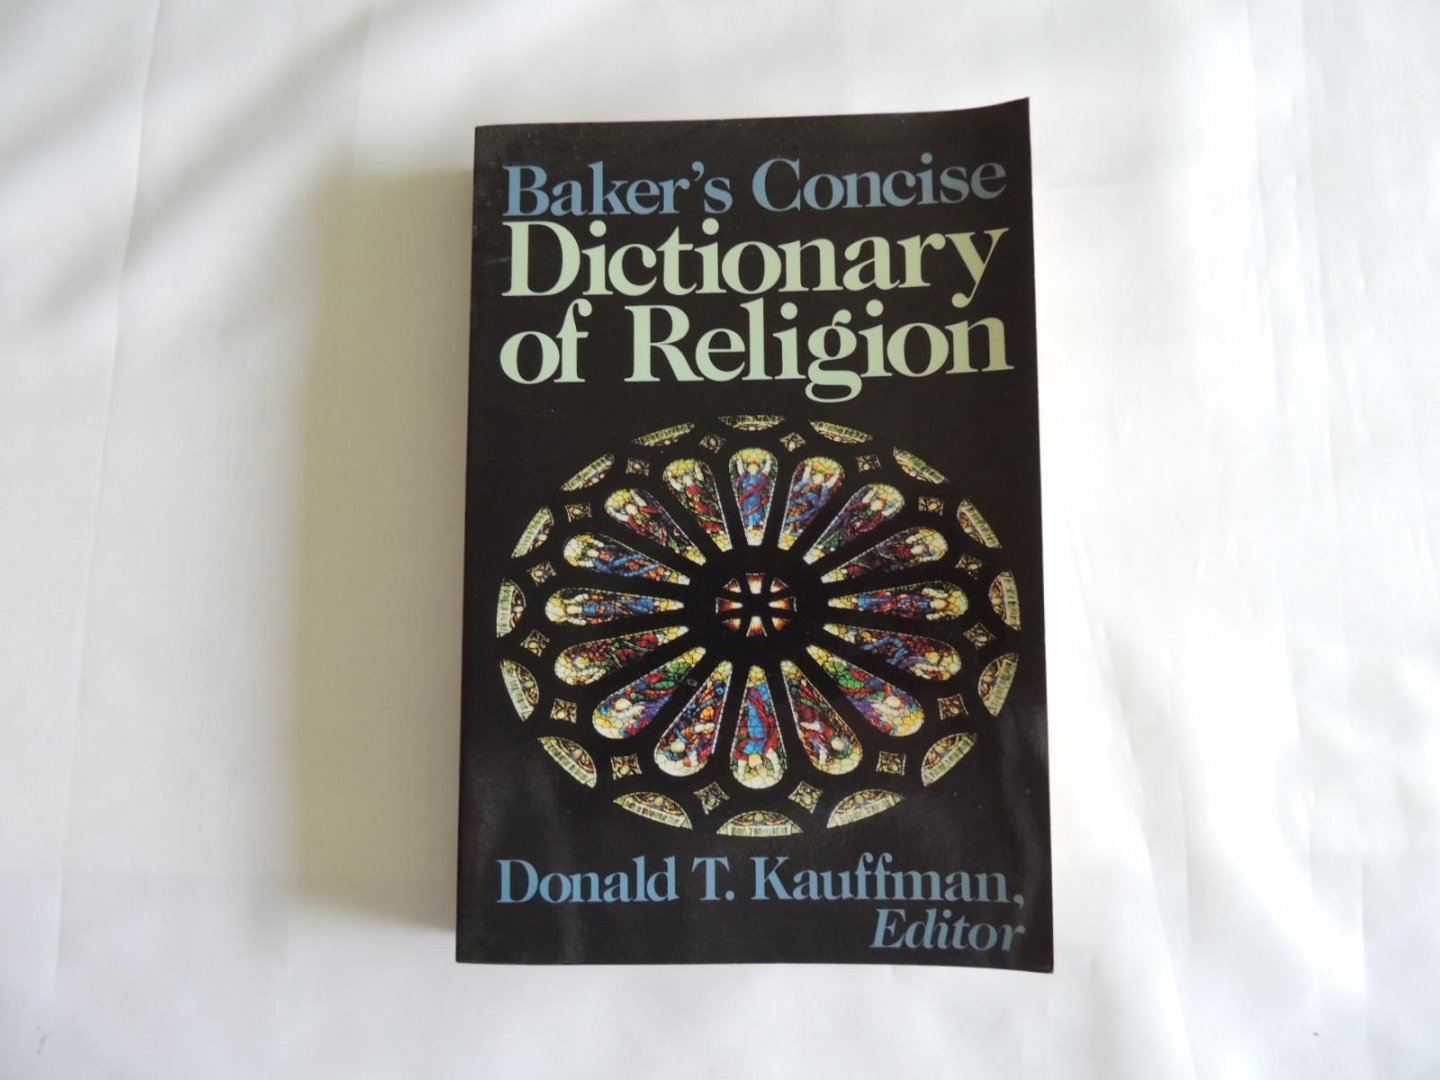 Donald T Kauffman - Baker's concise dictionary of religion